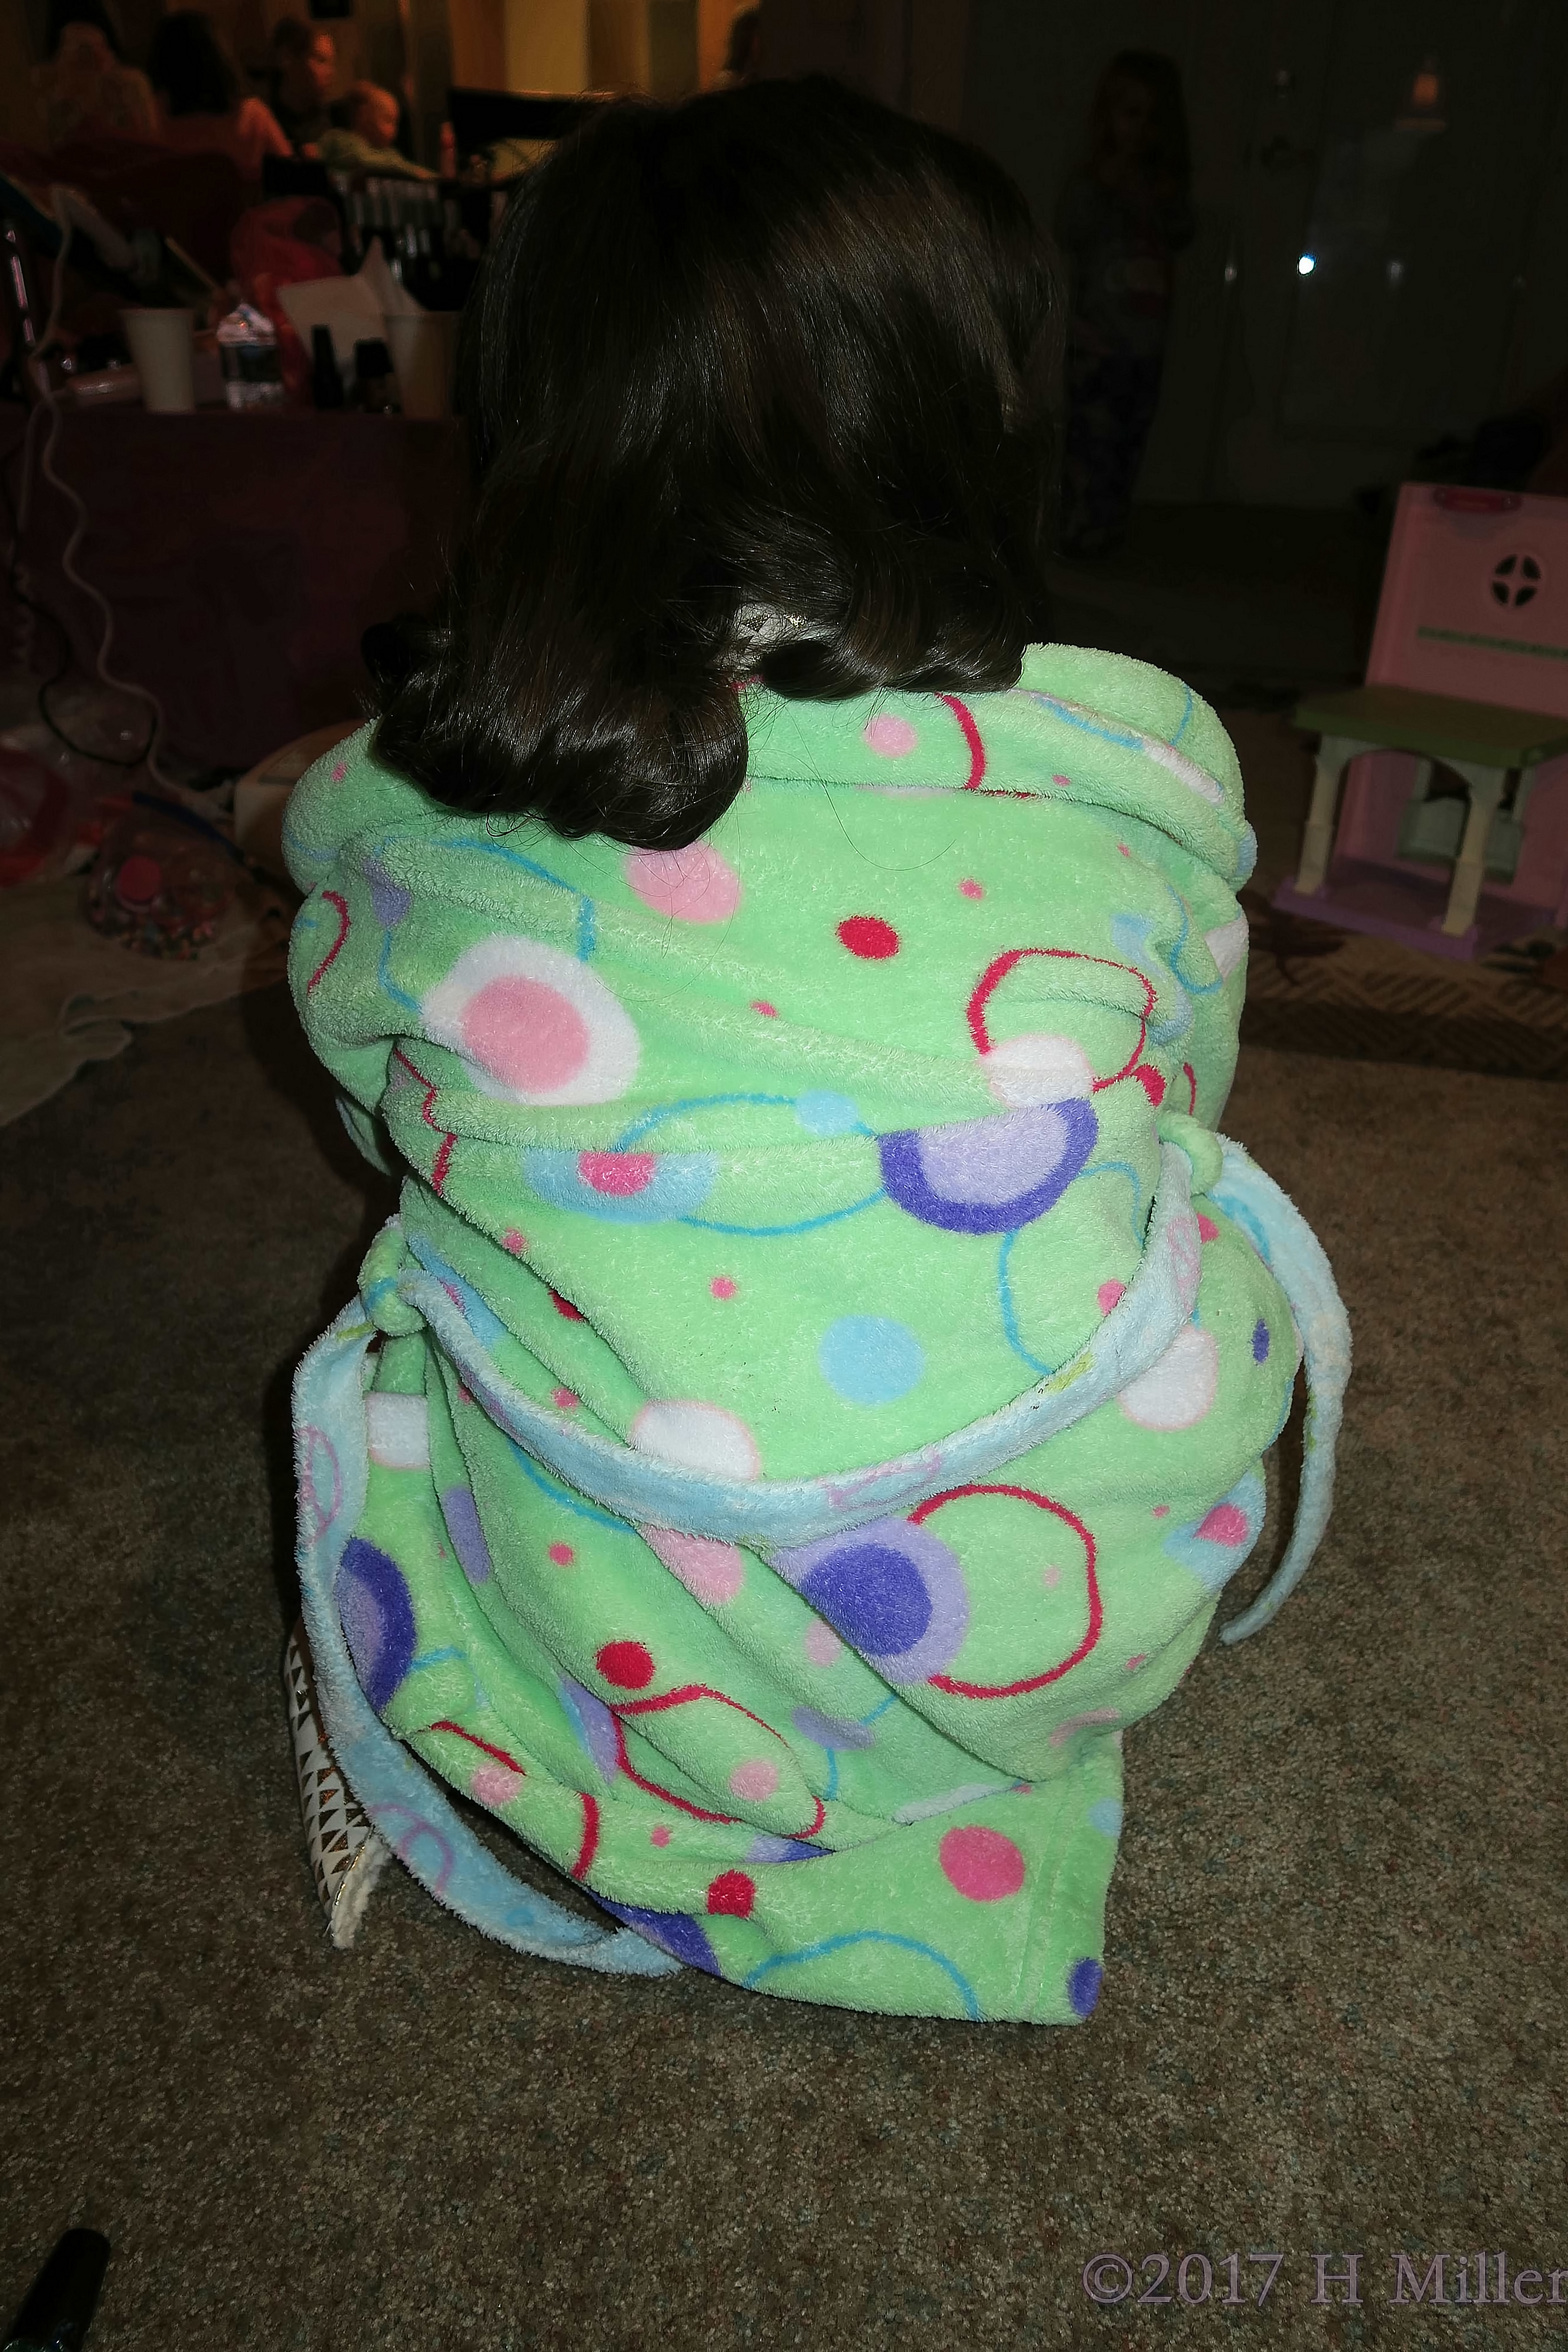 Fluffy Green Spa Robe With Orange And Blue Designs, Showing Off Her Curled Kids Hairstyle. 